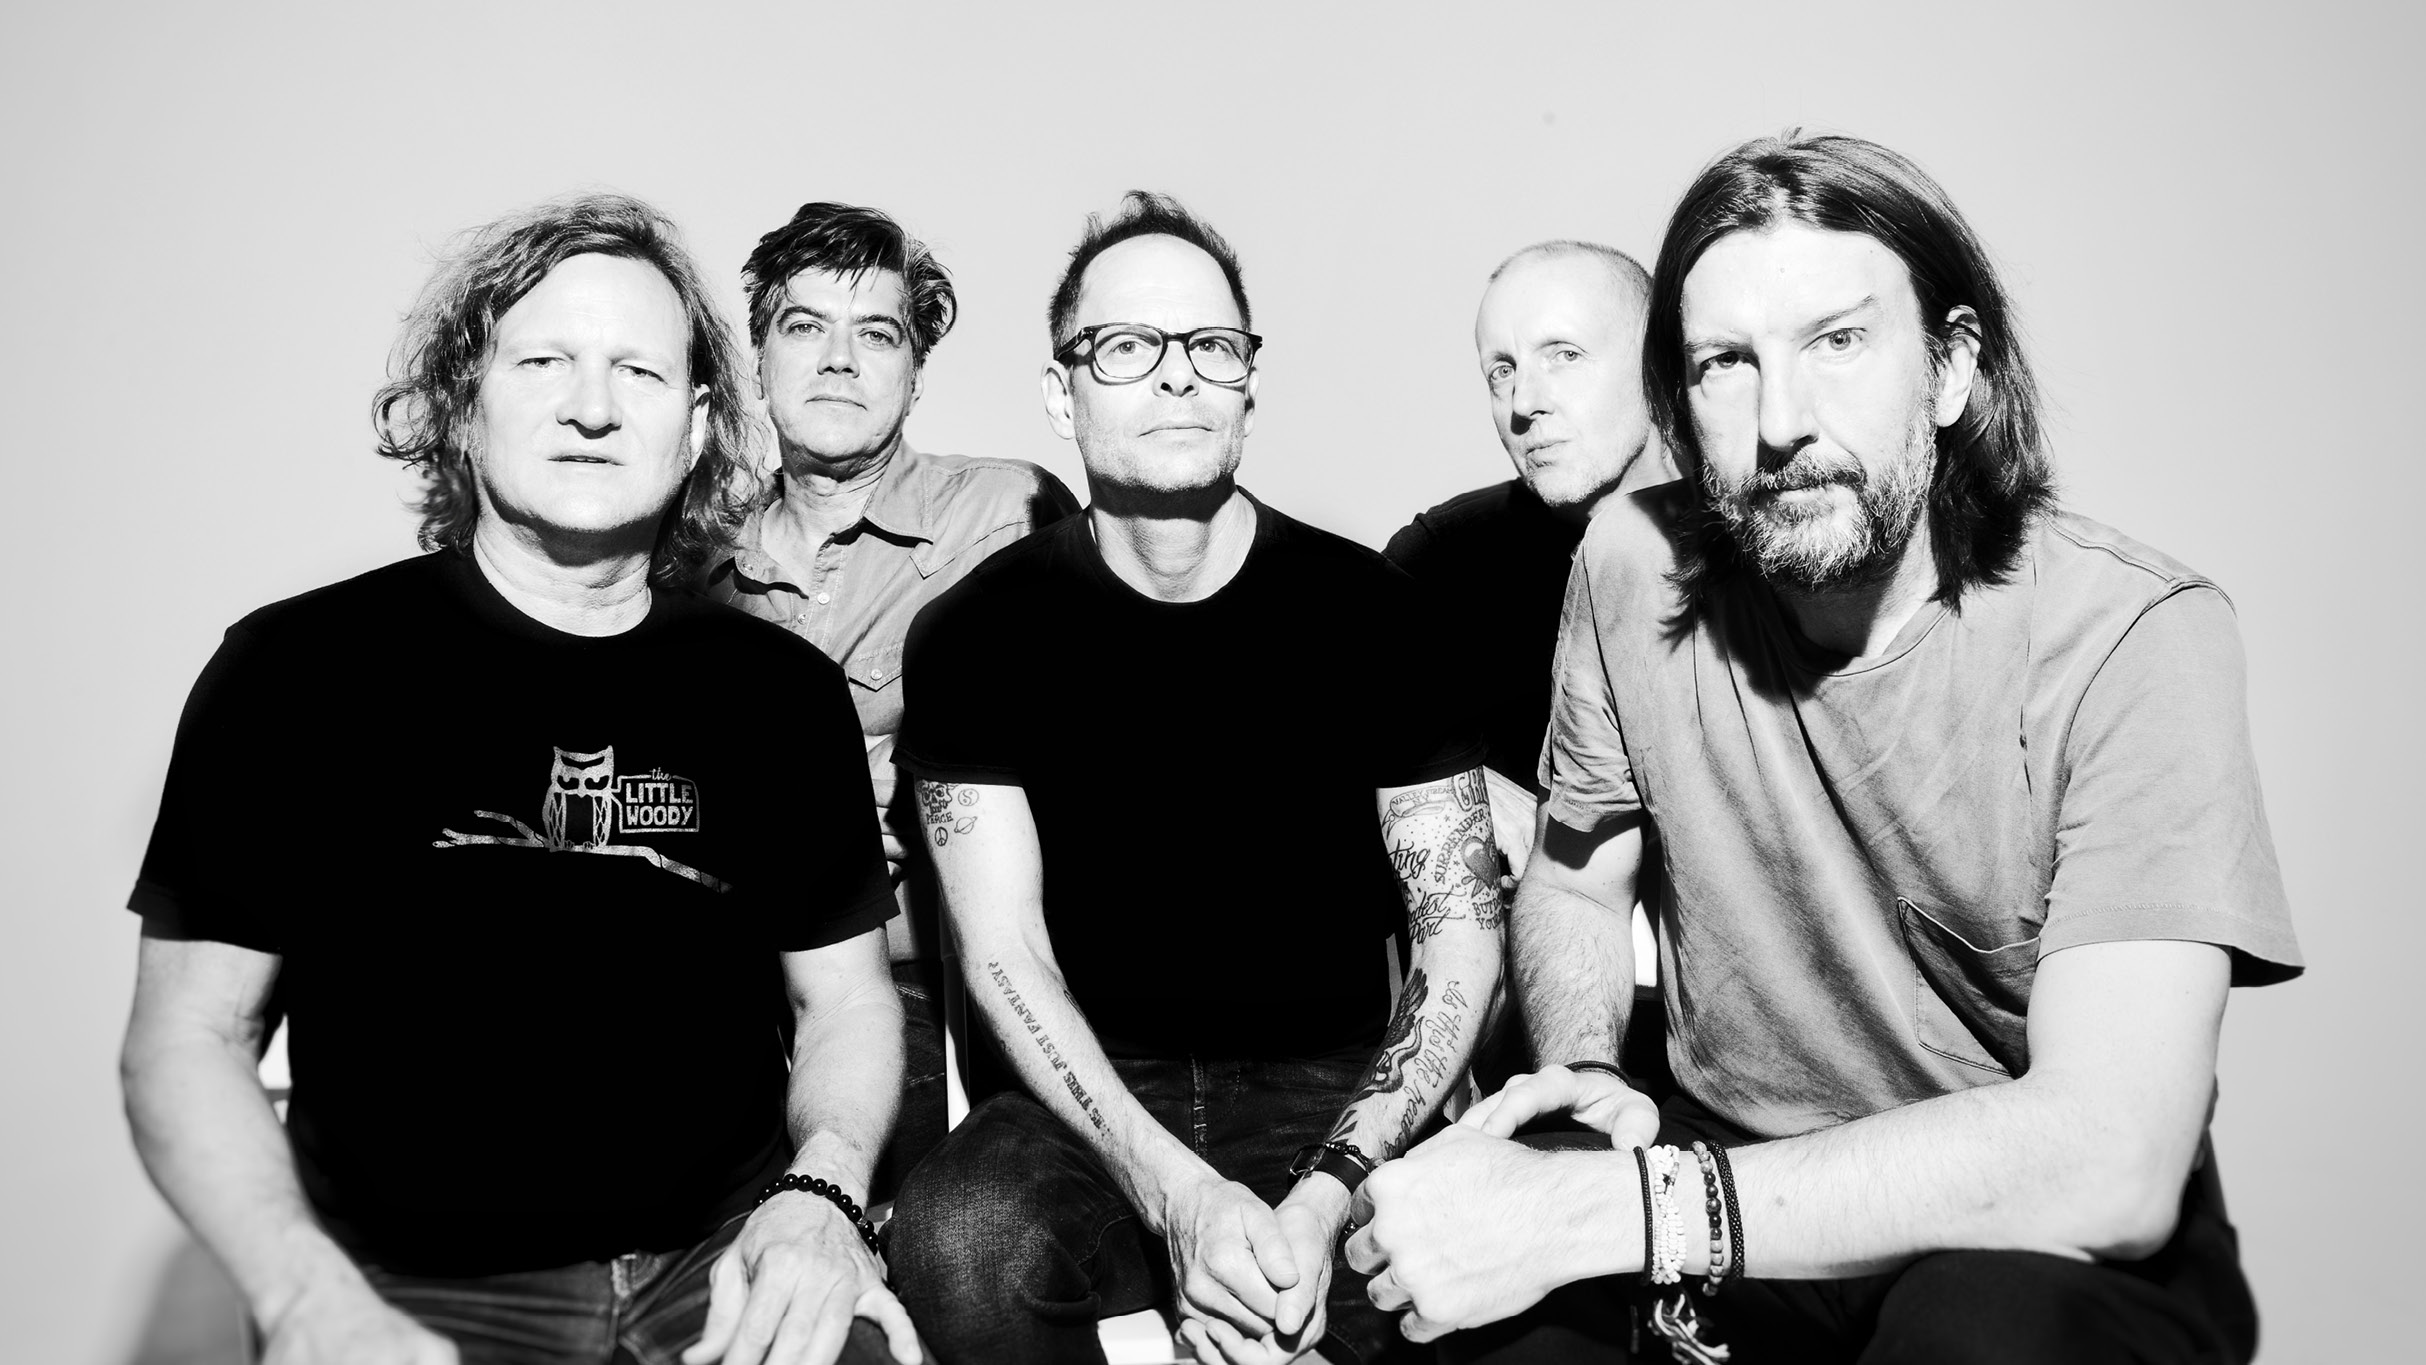 Gin Blossoms with special guests Fastball